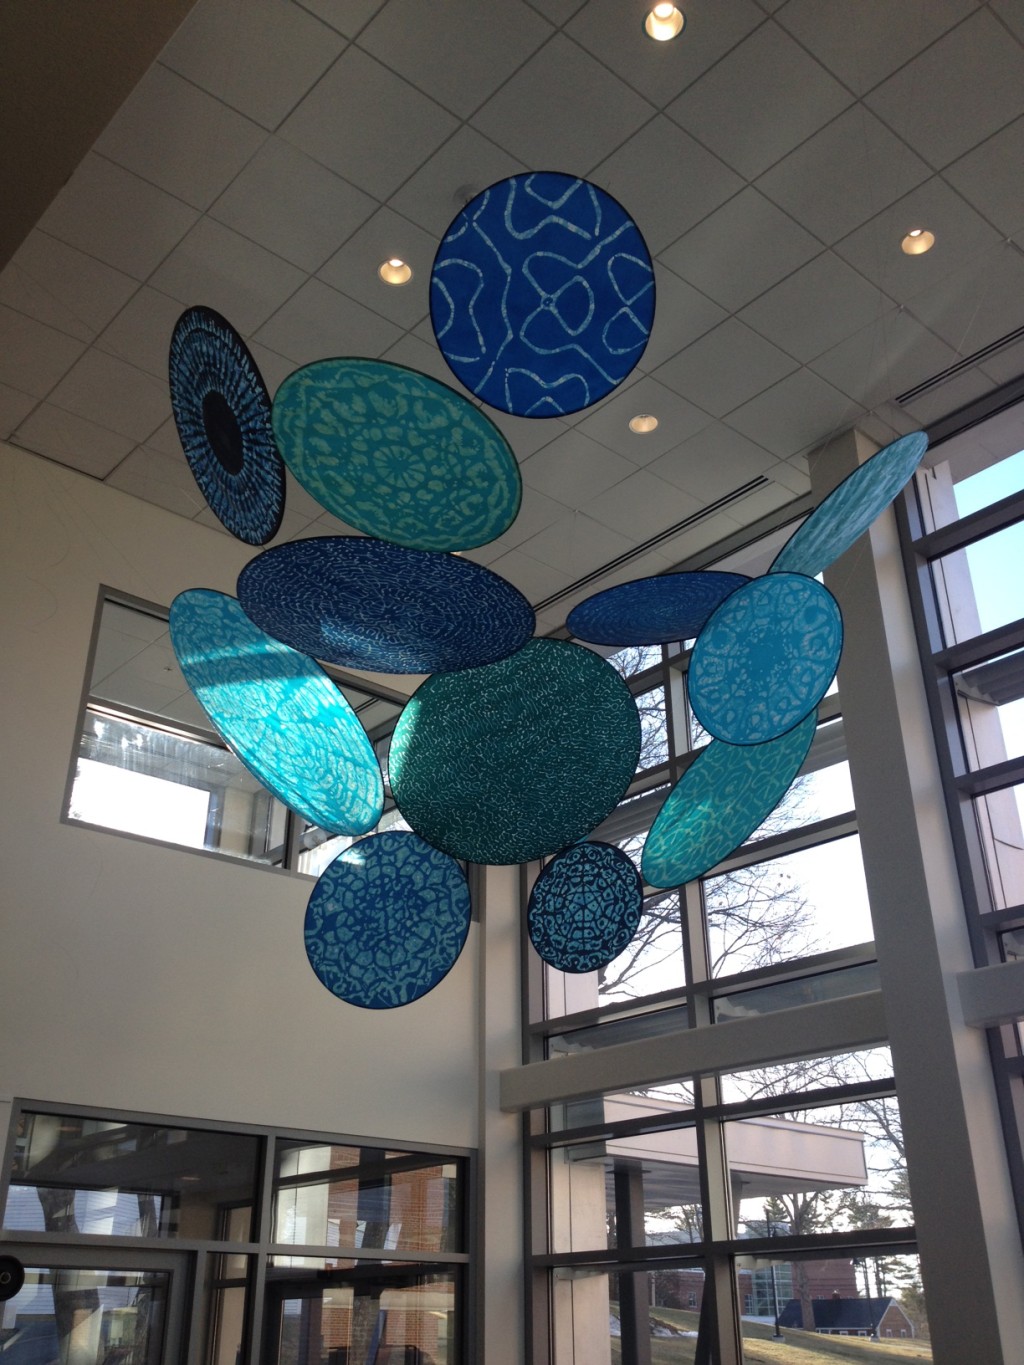 "Wave Phenomena" by Kim Bernard, previously exhibited in the Ketchum Library Art Gallery